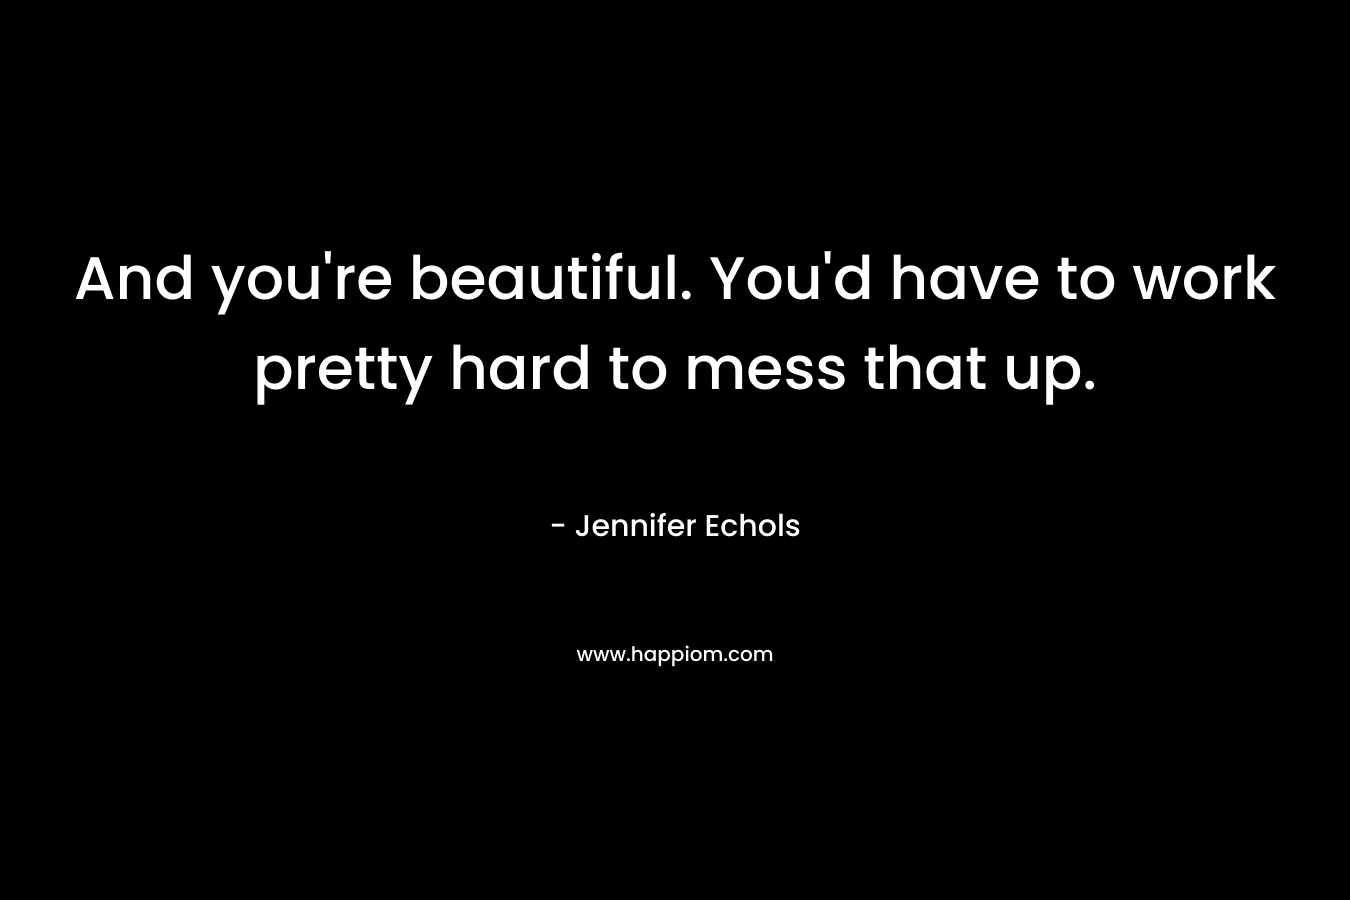 And you're beautiful. You'd have to work pretty hard to mess that up.